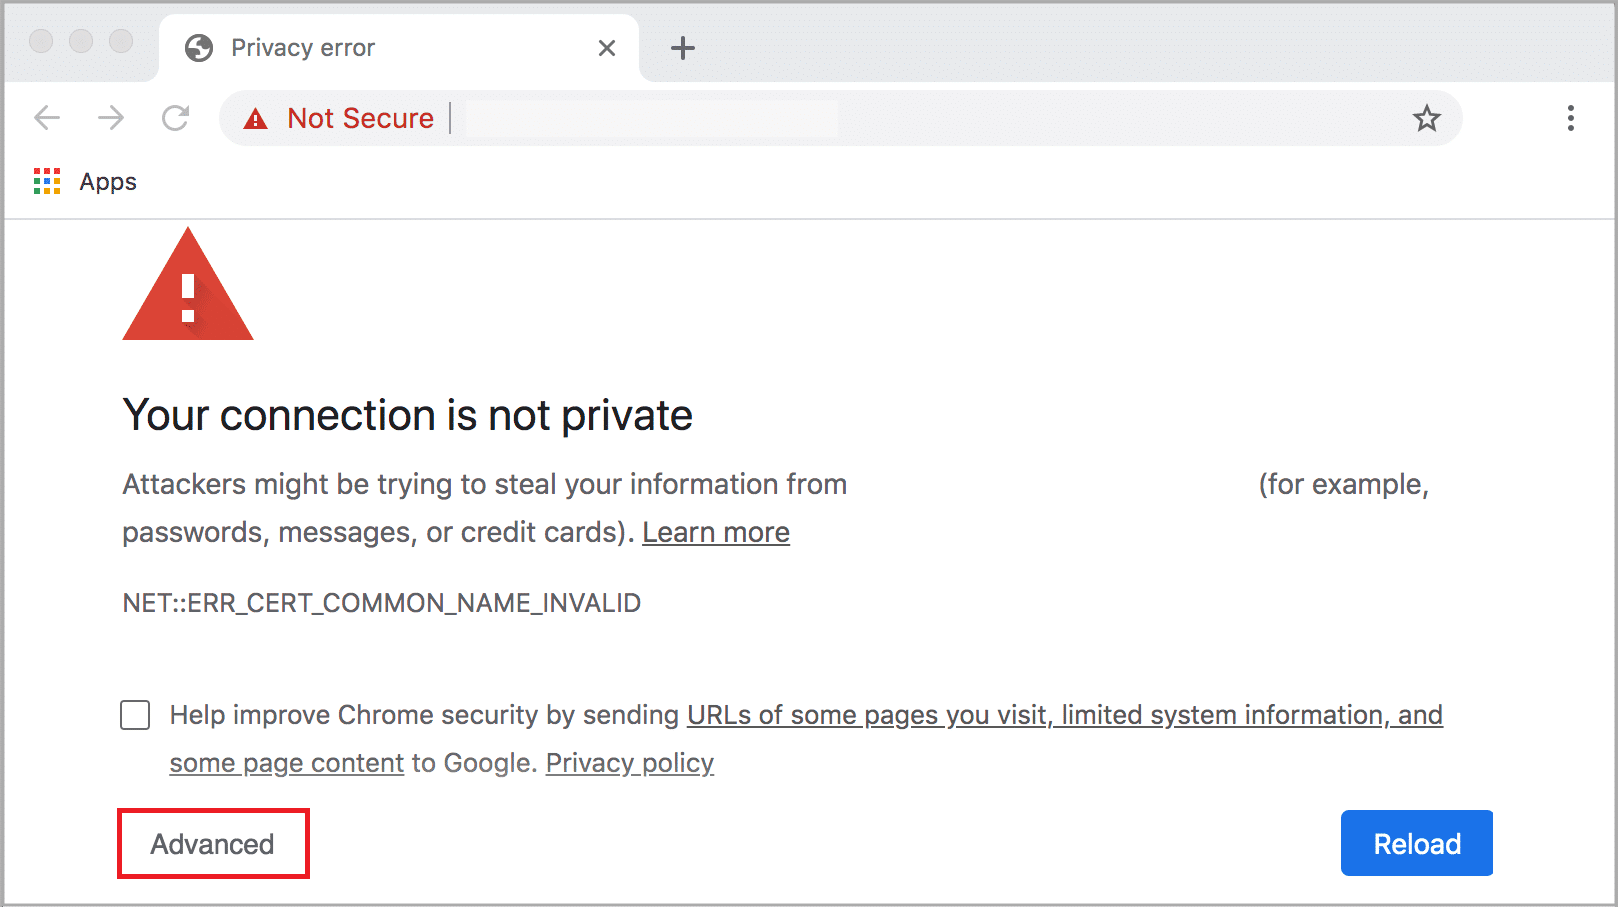 On the Privacy error page, click on the Advanced button